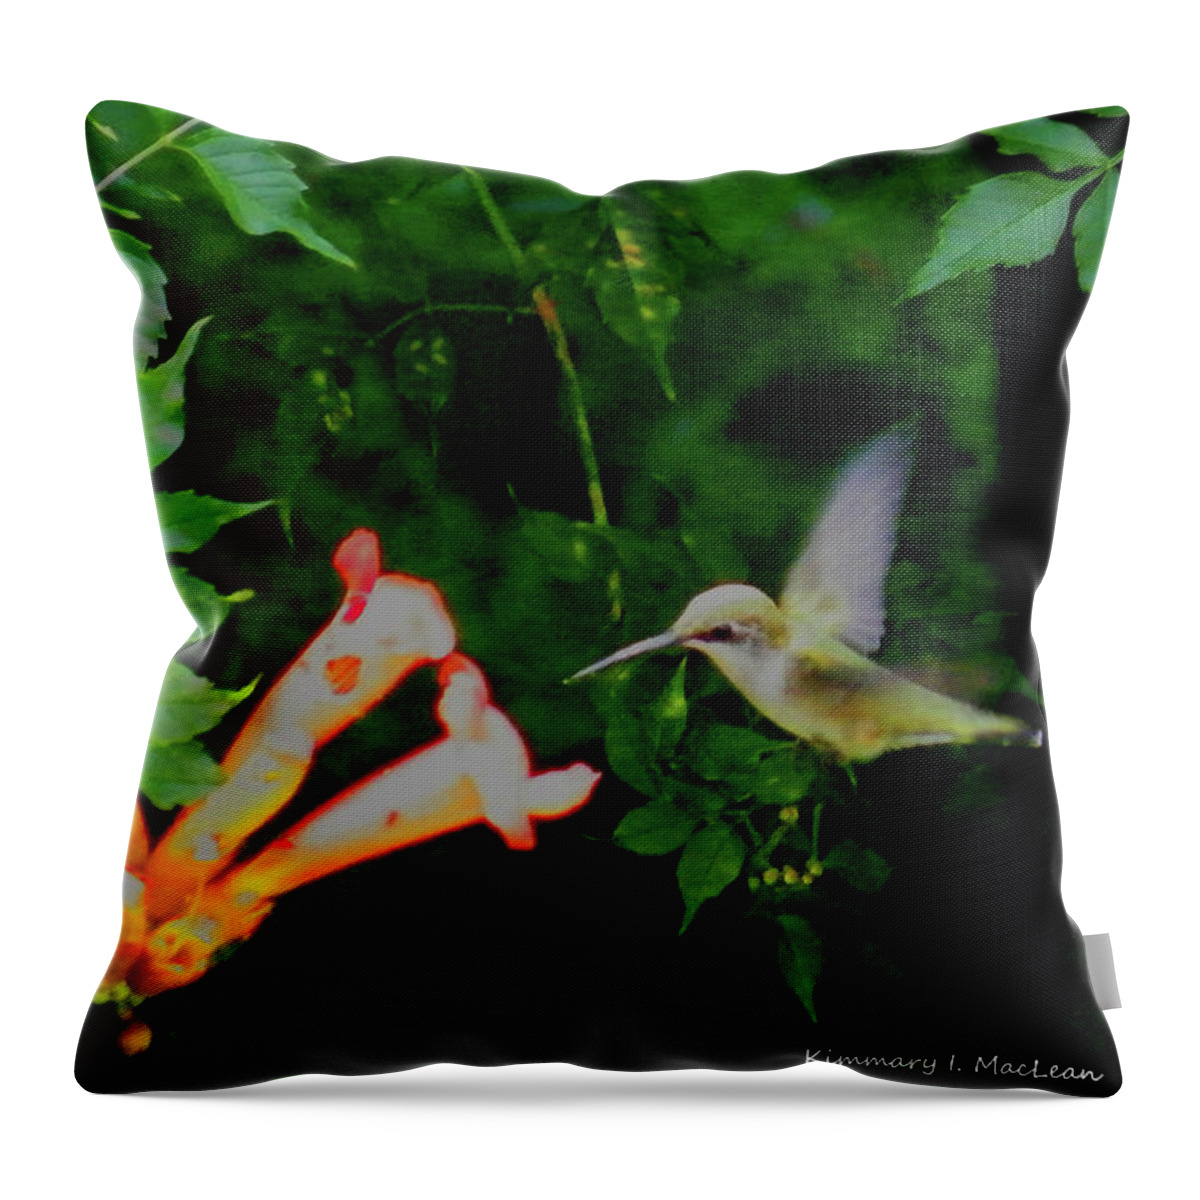 Hummingbird Throw Pillow featuring the photograph A Tasty Treat by Kimmary MacLean